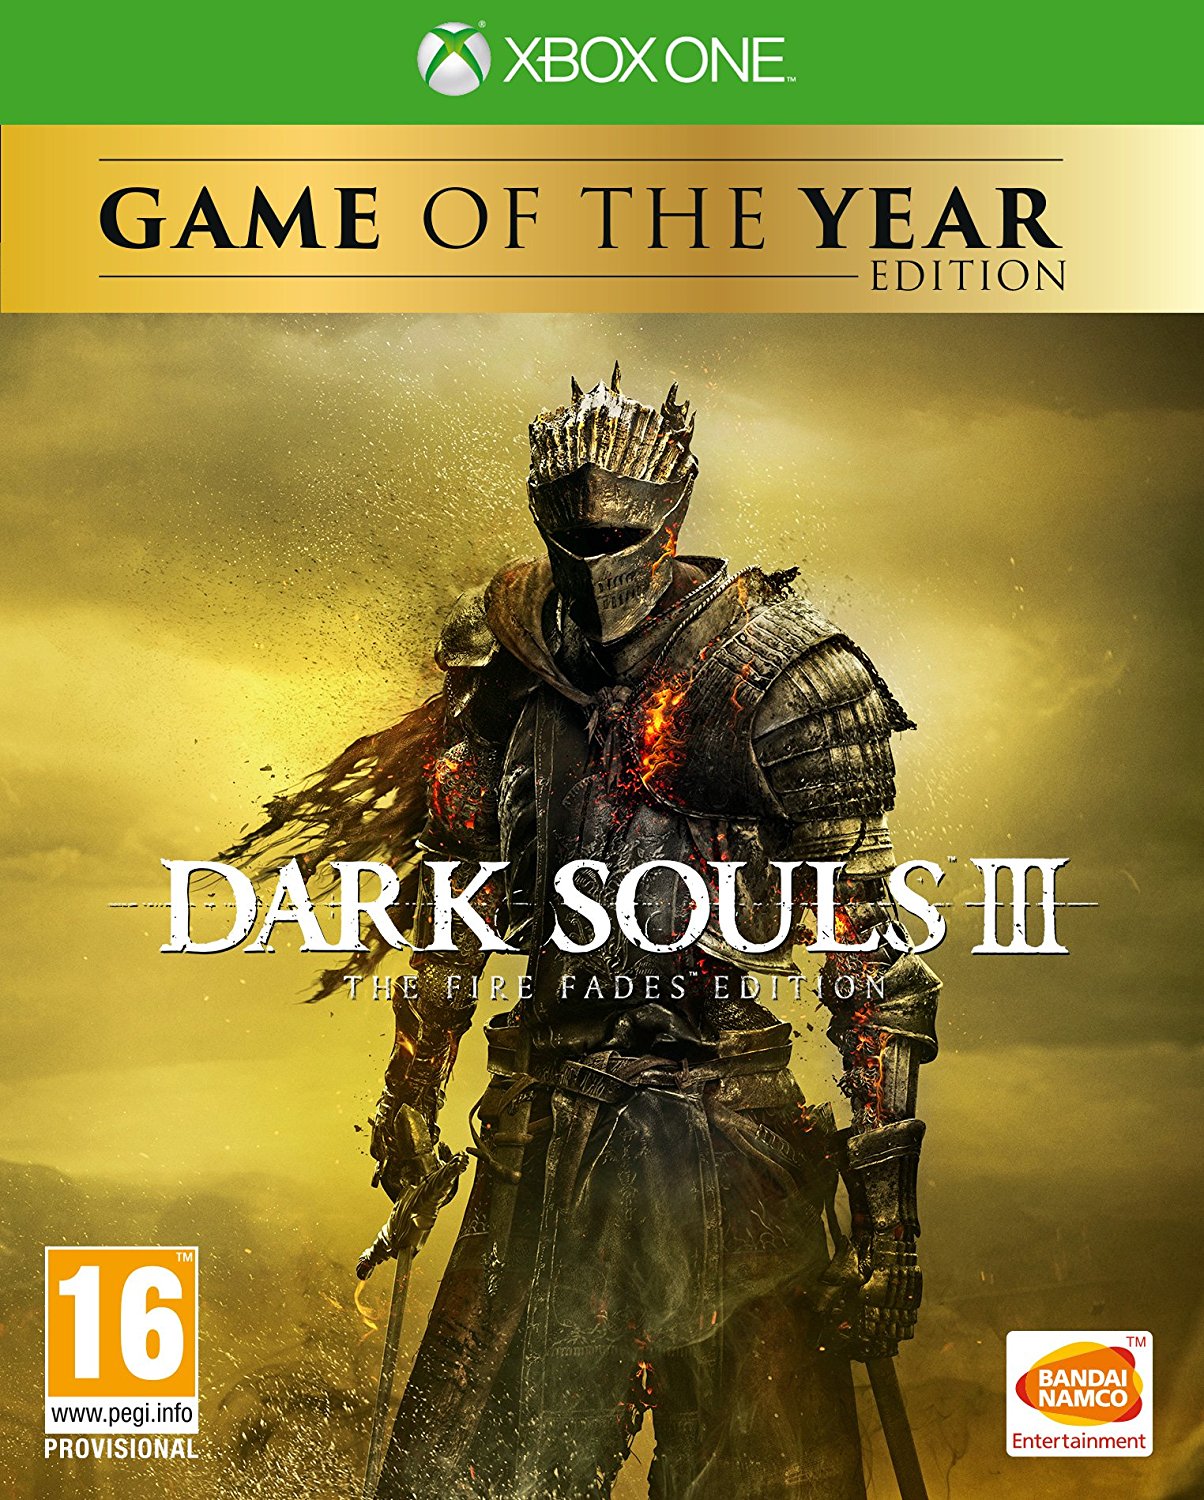 Dark Souls 3 Game of the Year Edition